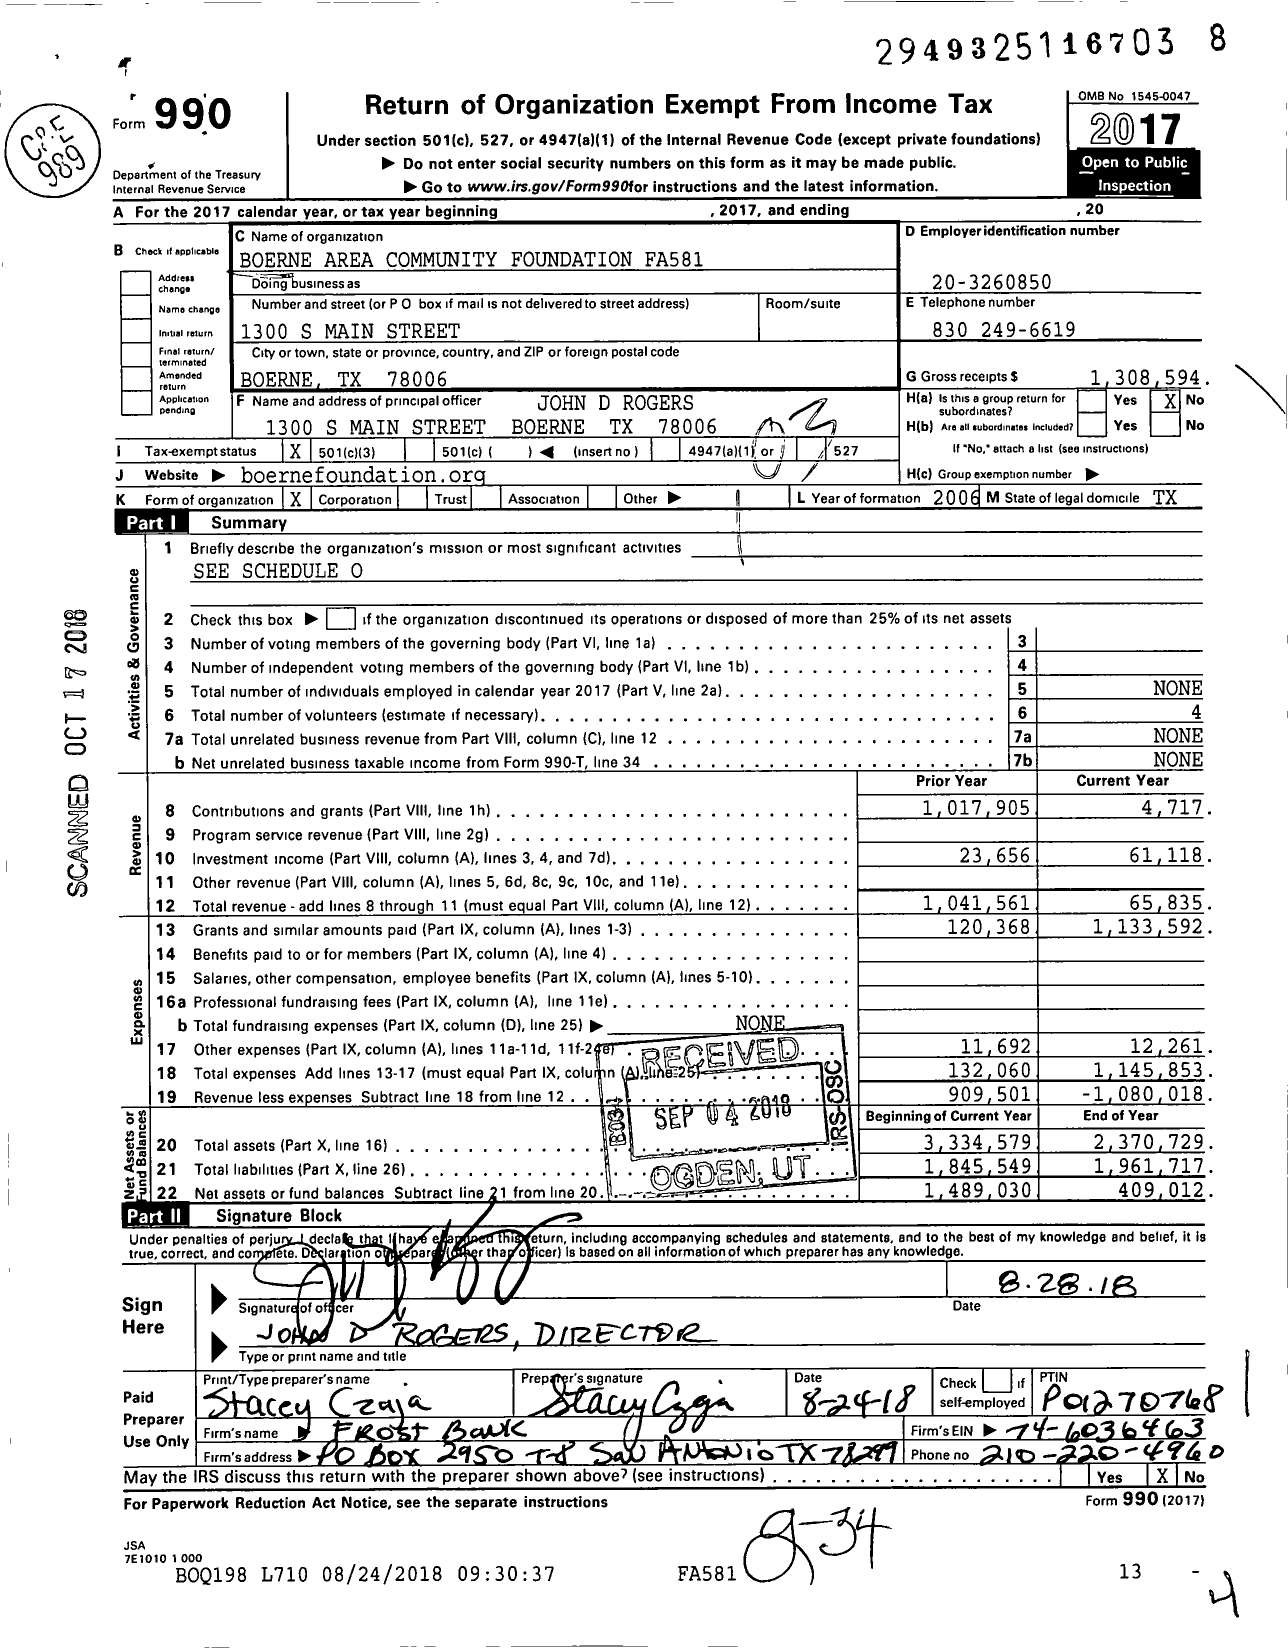 Image of first page of 2017 Form 990 for Boerne Area Community Foundation Fa581